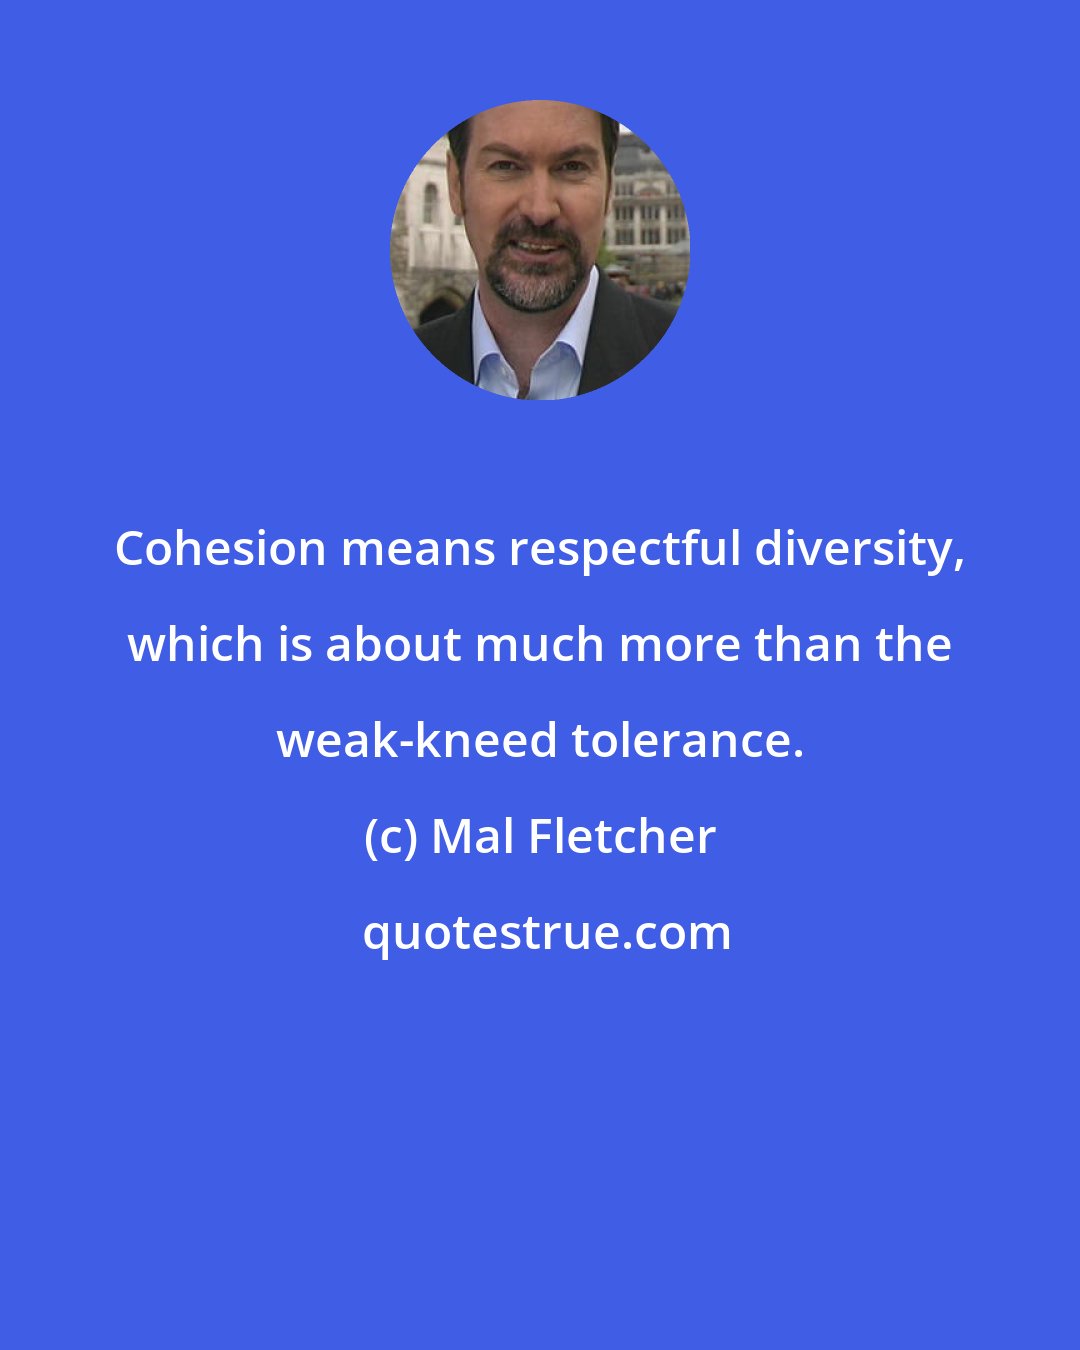 Mal Fletcher: Cohesion means respectful diversity, which is about much more than the weak-kneed tolerance.